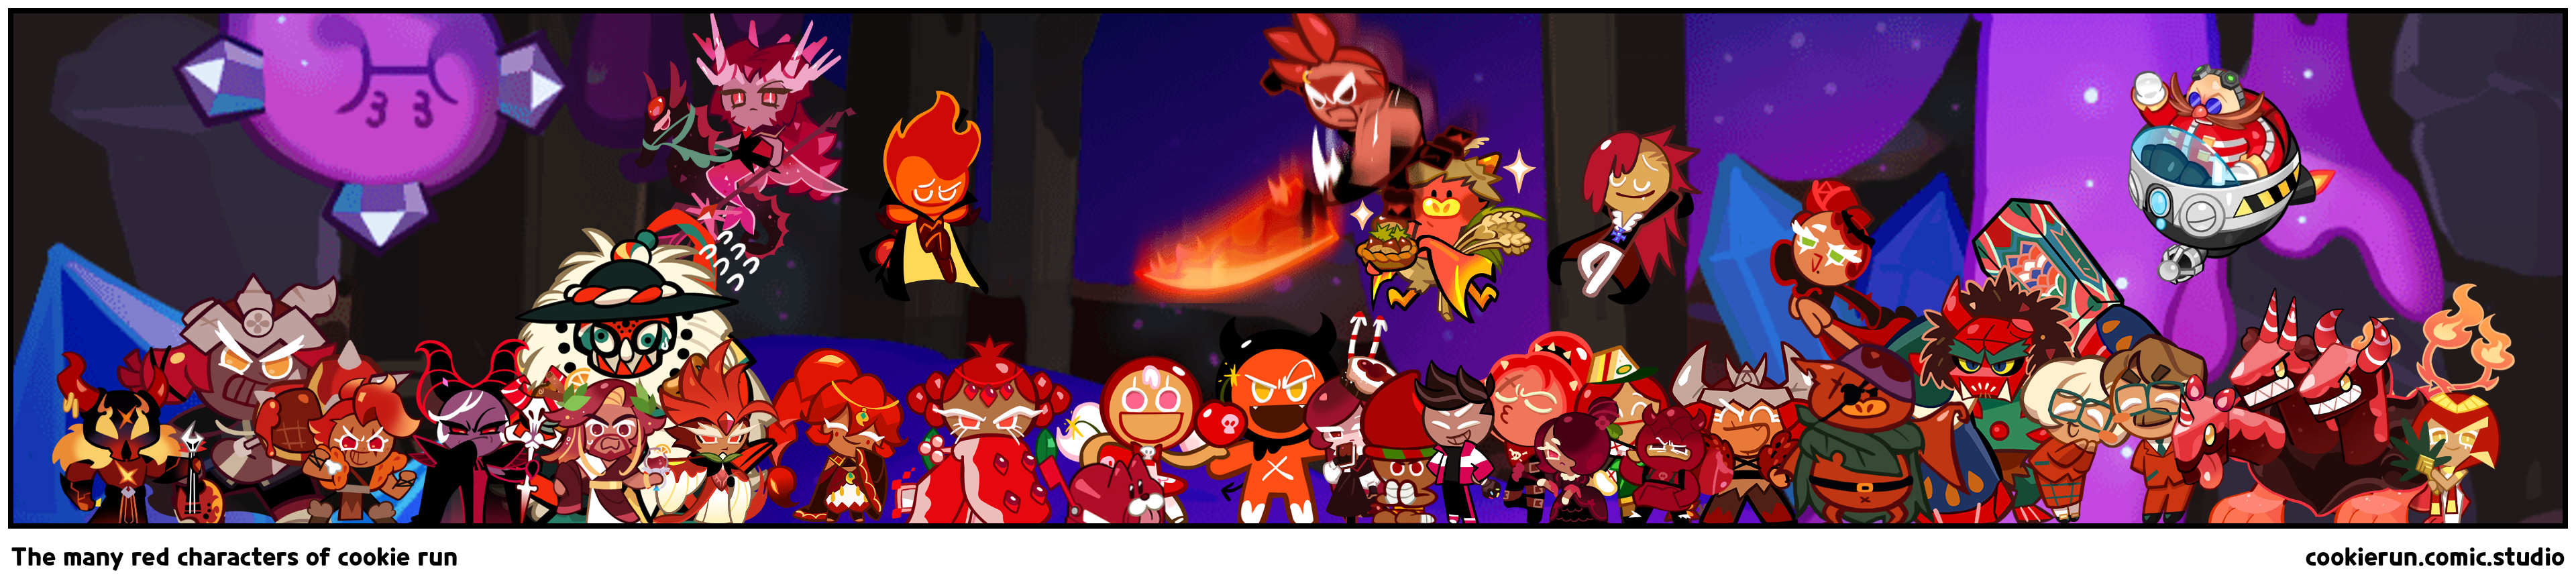 The many red characters of cookie run